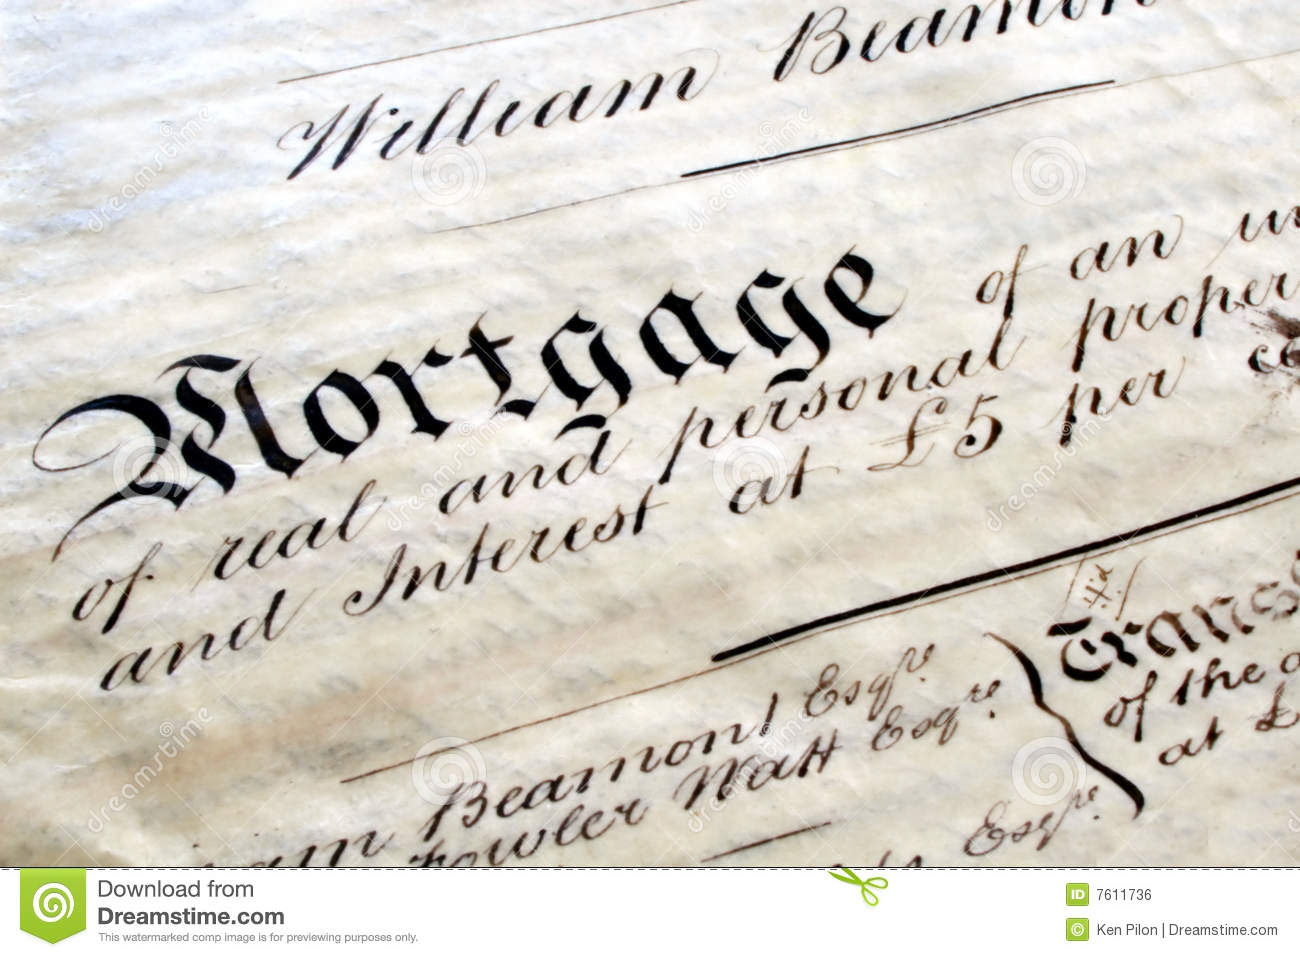 old mortgage deed 7611736